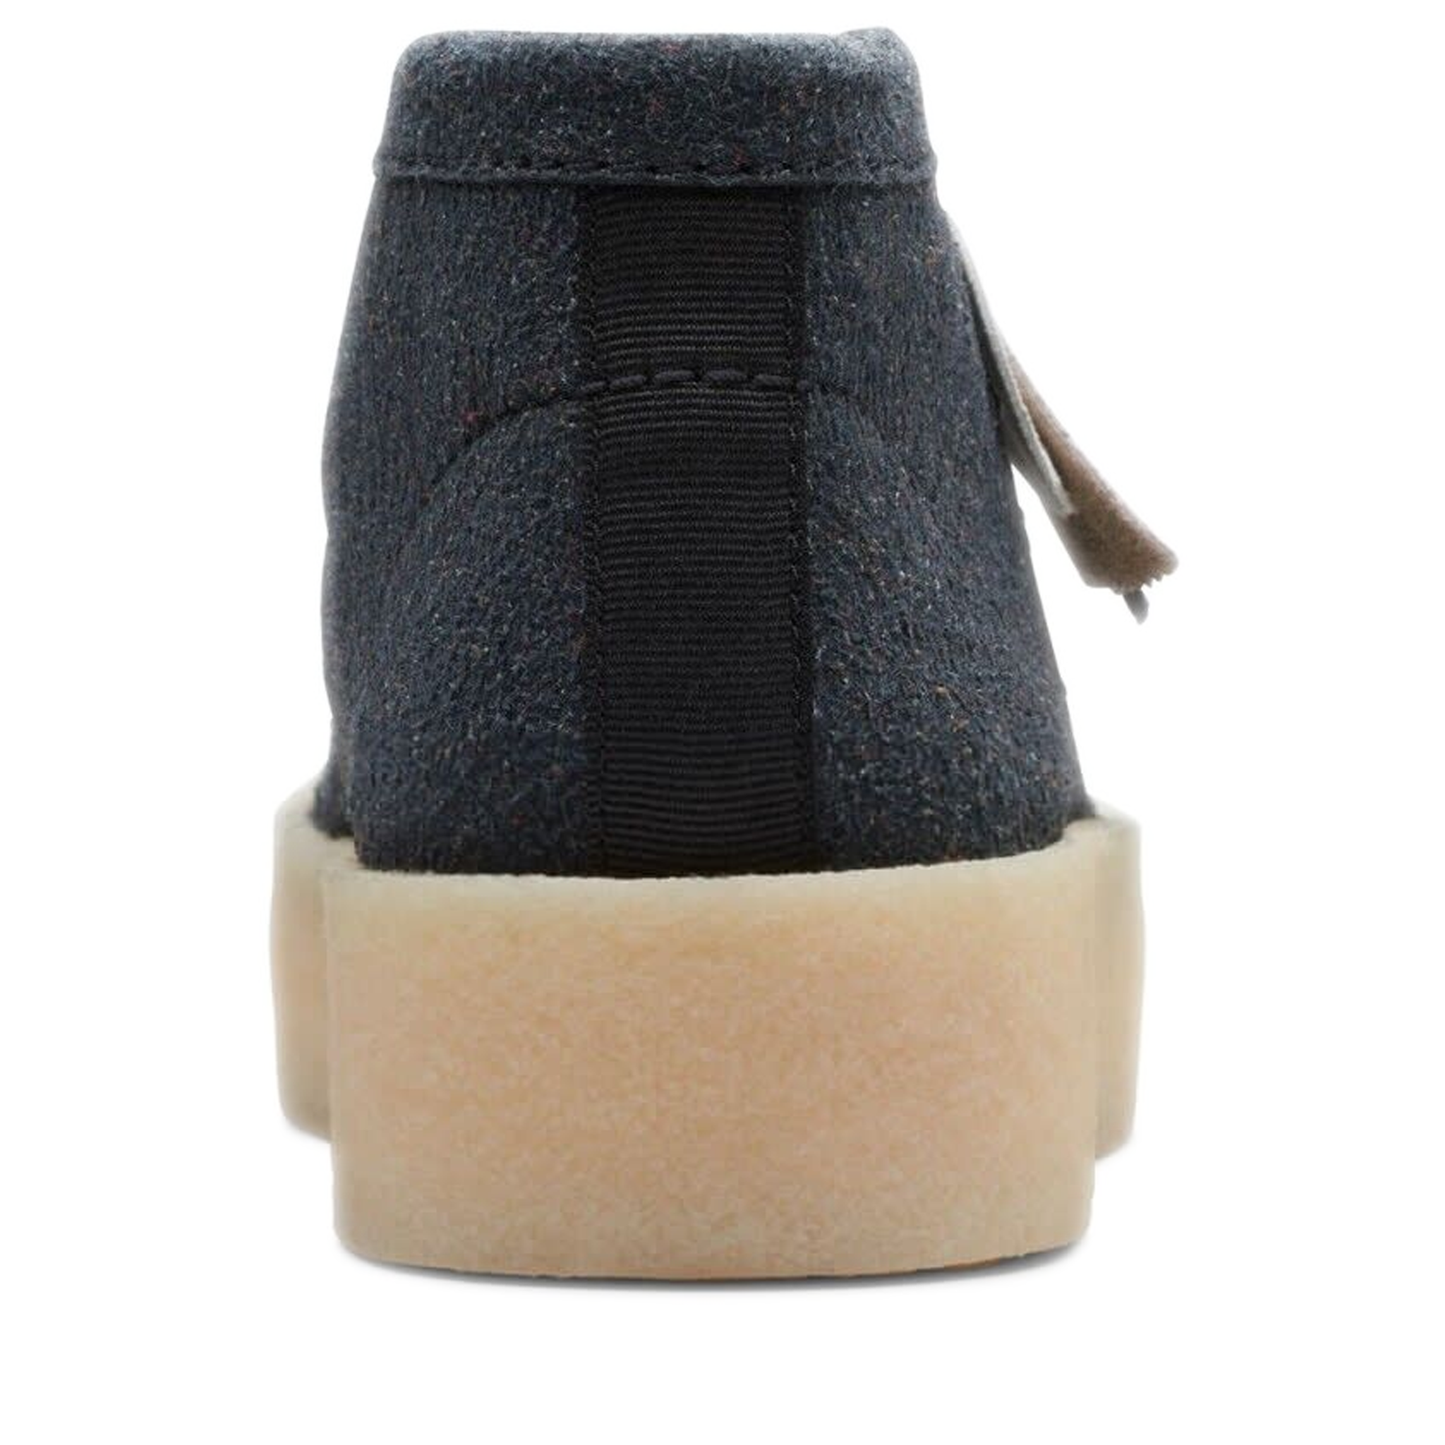 Men's Clarks Wallabee Cup - Black Eco Leather